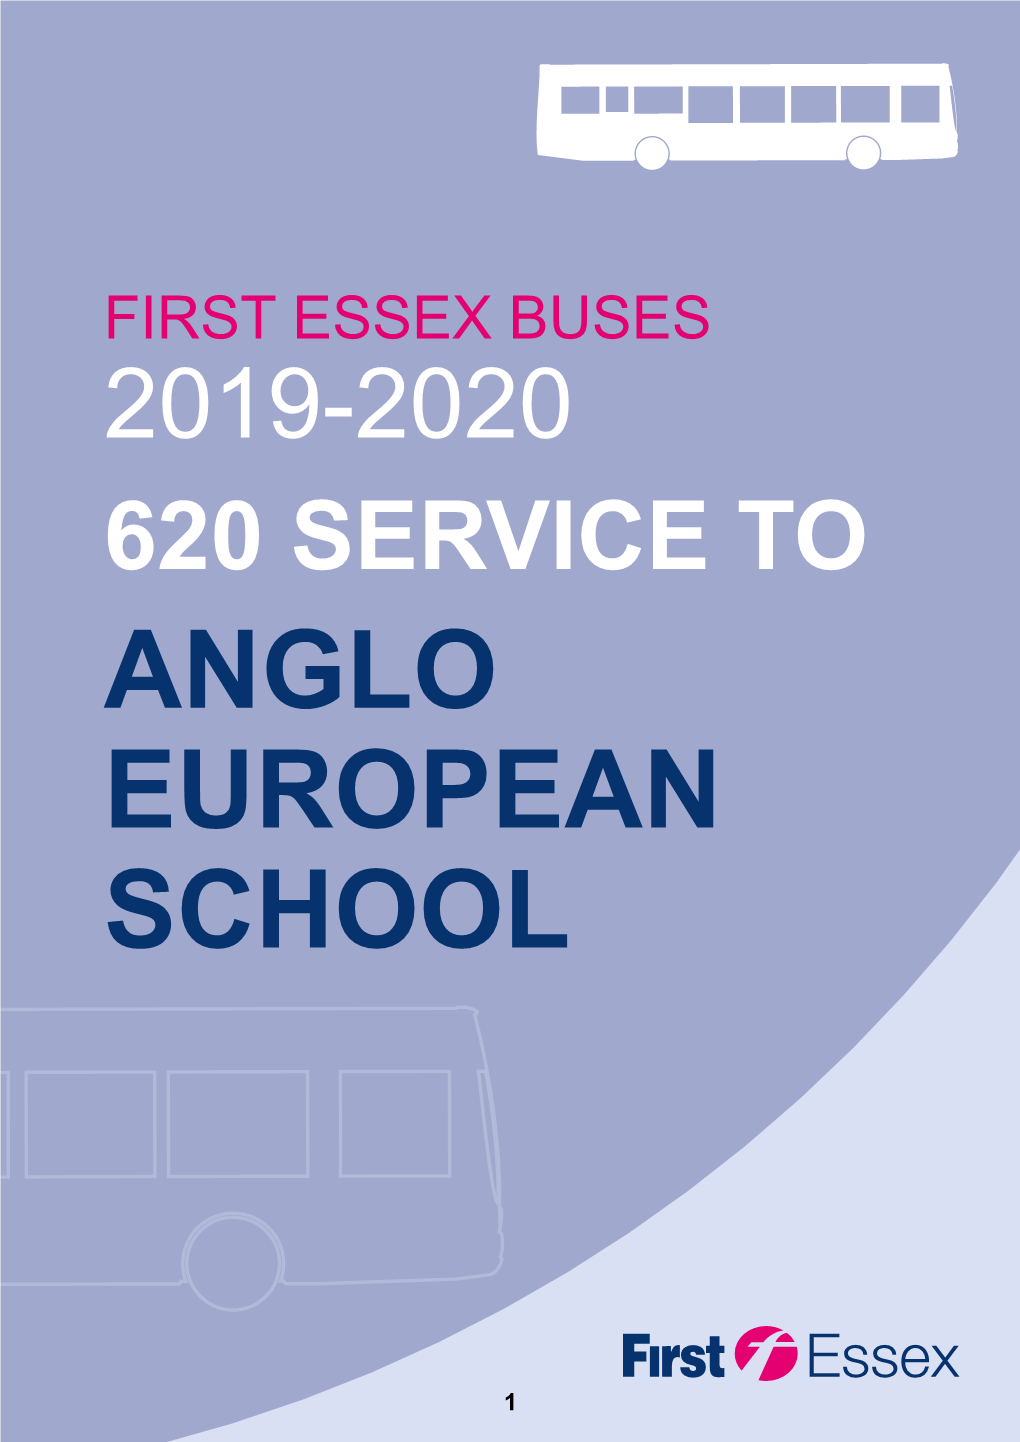 Anglo European School Directly for Confirmation of Year Group Start Times